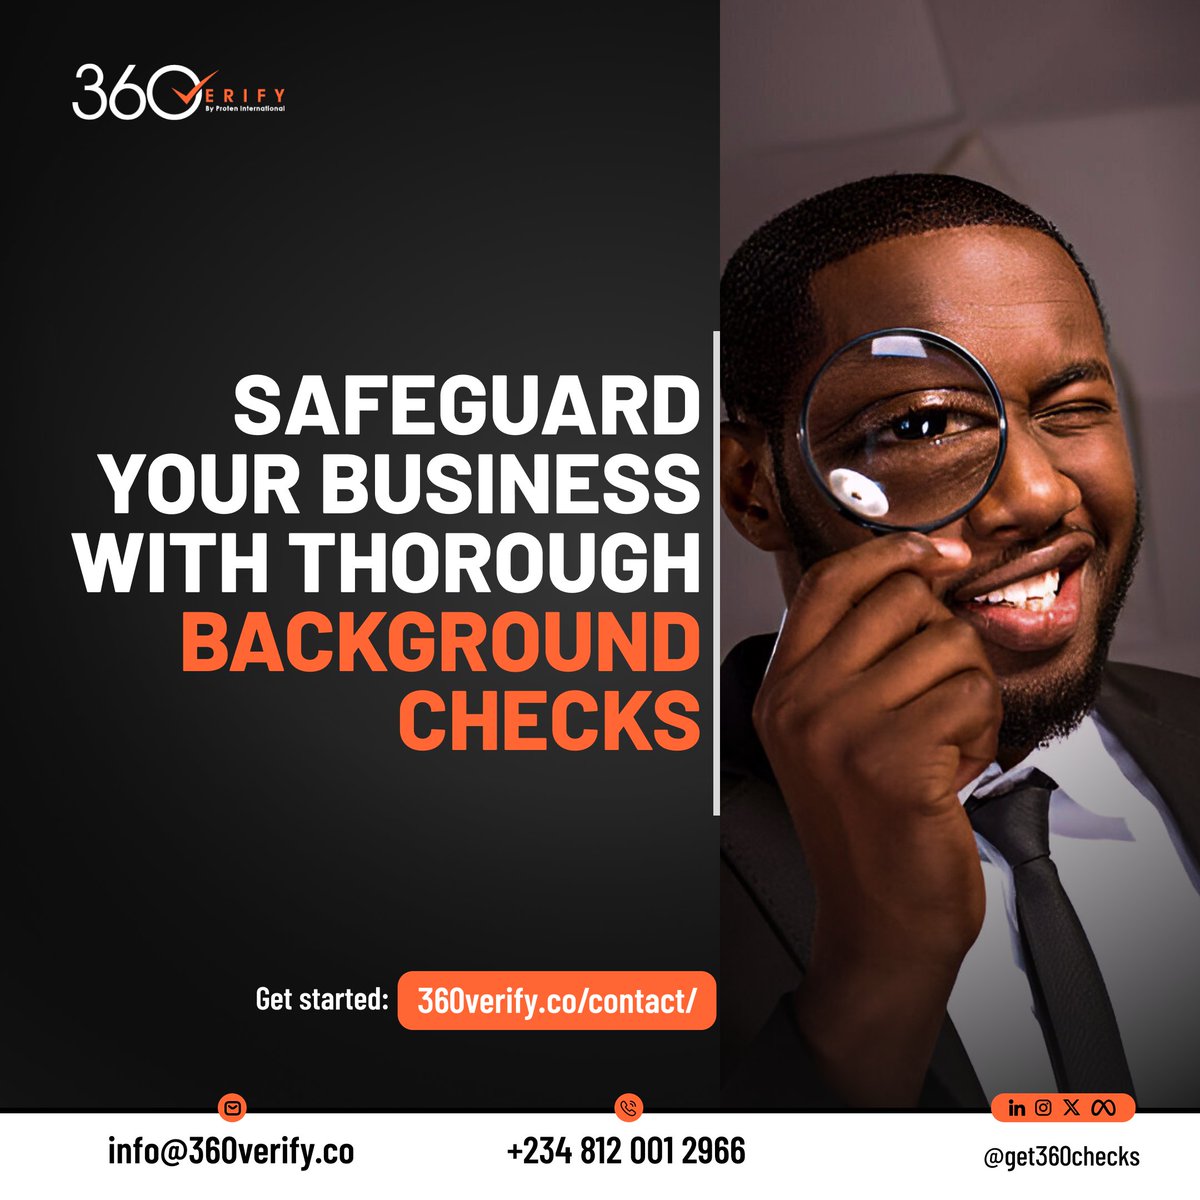 Roses are red, violets are blue,
@get360checks secures your business through,
Credible and reliable background checks.

Book a FREE Consultation: 360verify.co/contact

#BackgroundChecks #HRManagers #Leaders #Management